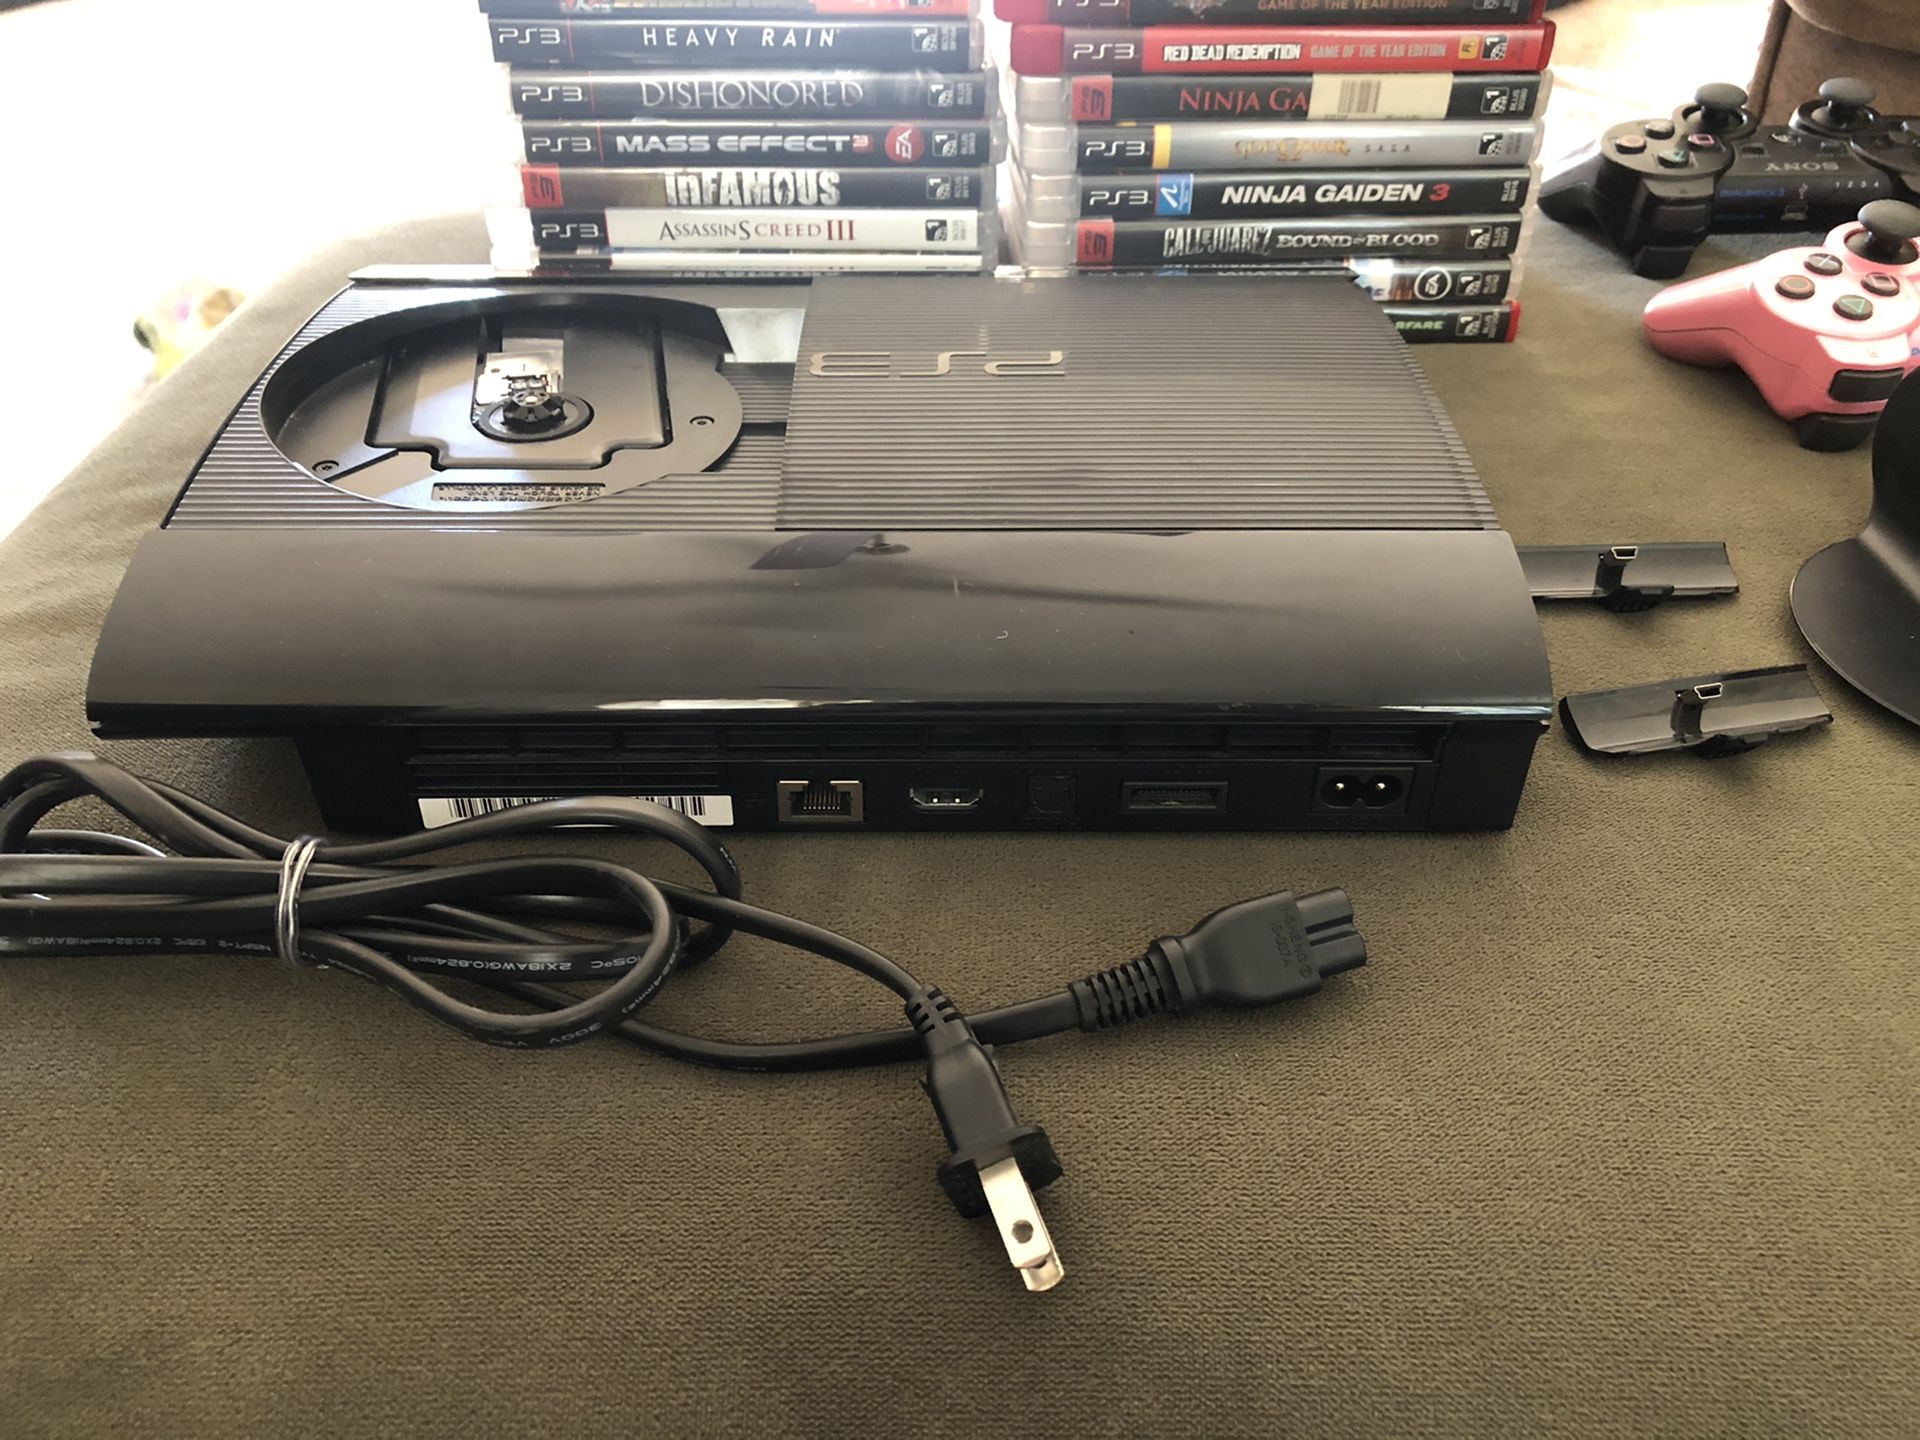 PS3, 2 controllers, 17 games, and a charging station